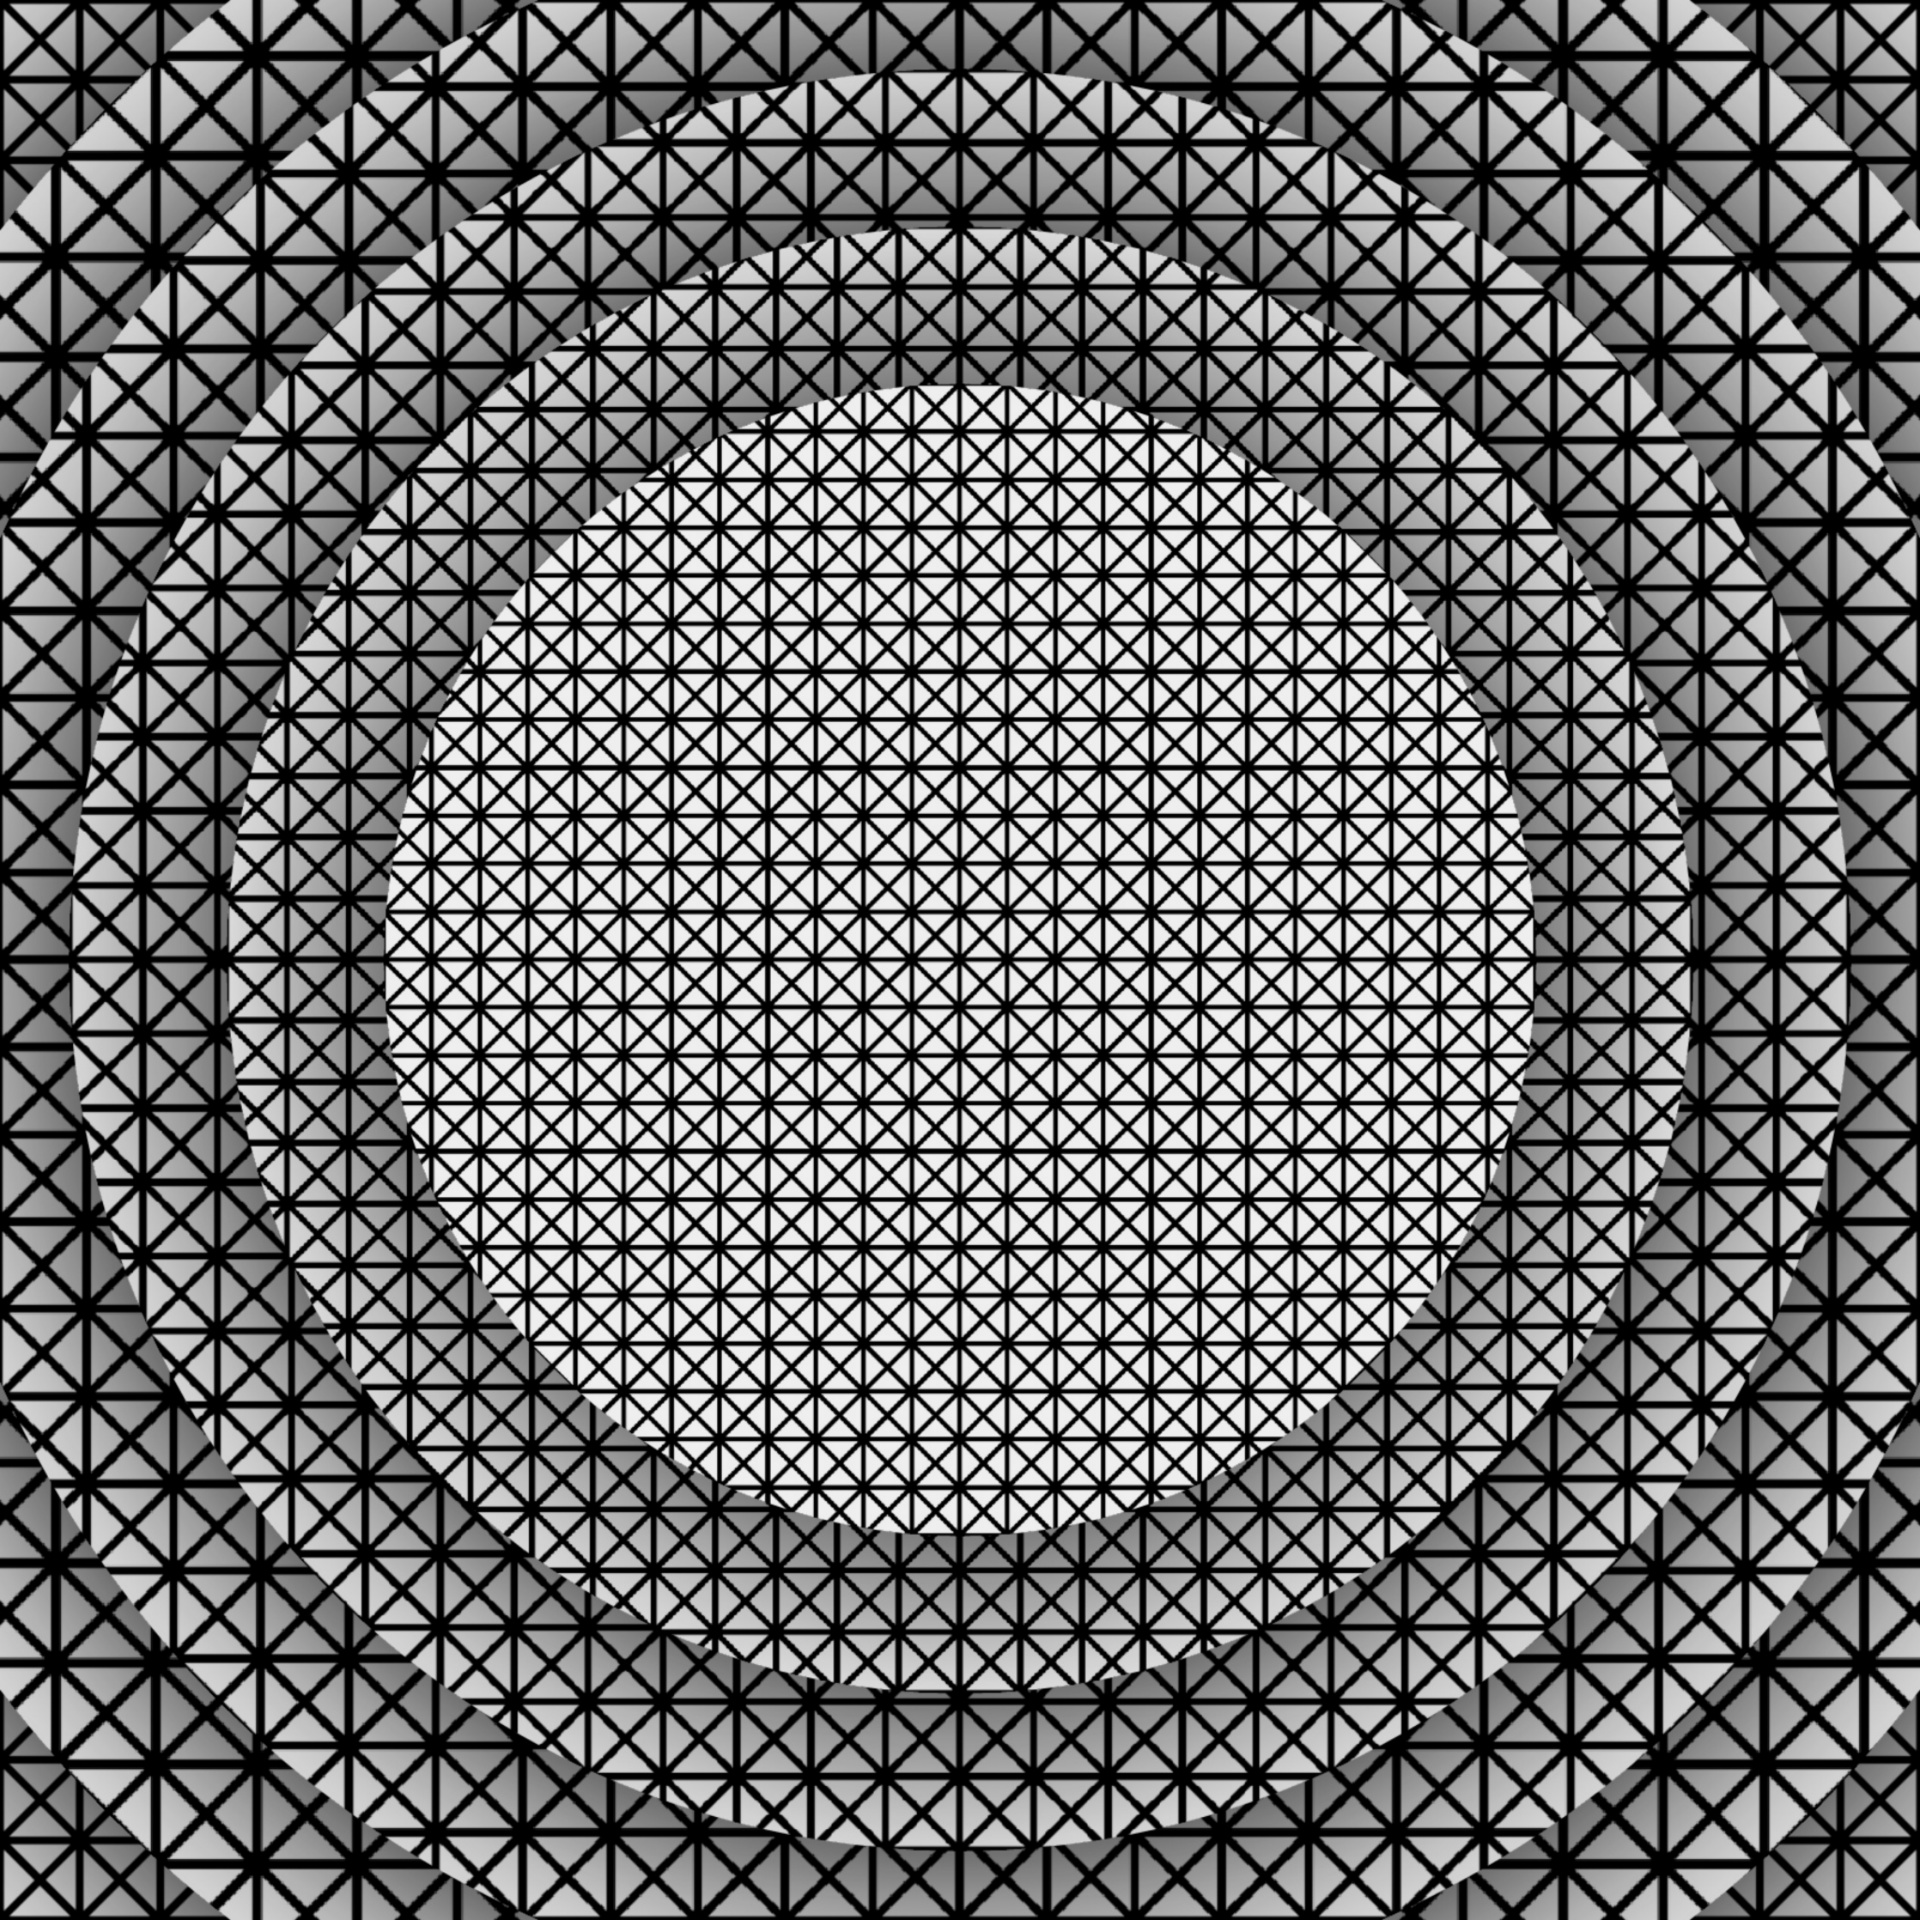 wallpaper concentric grid free photo